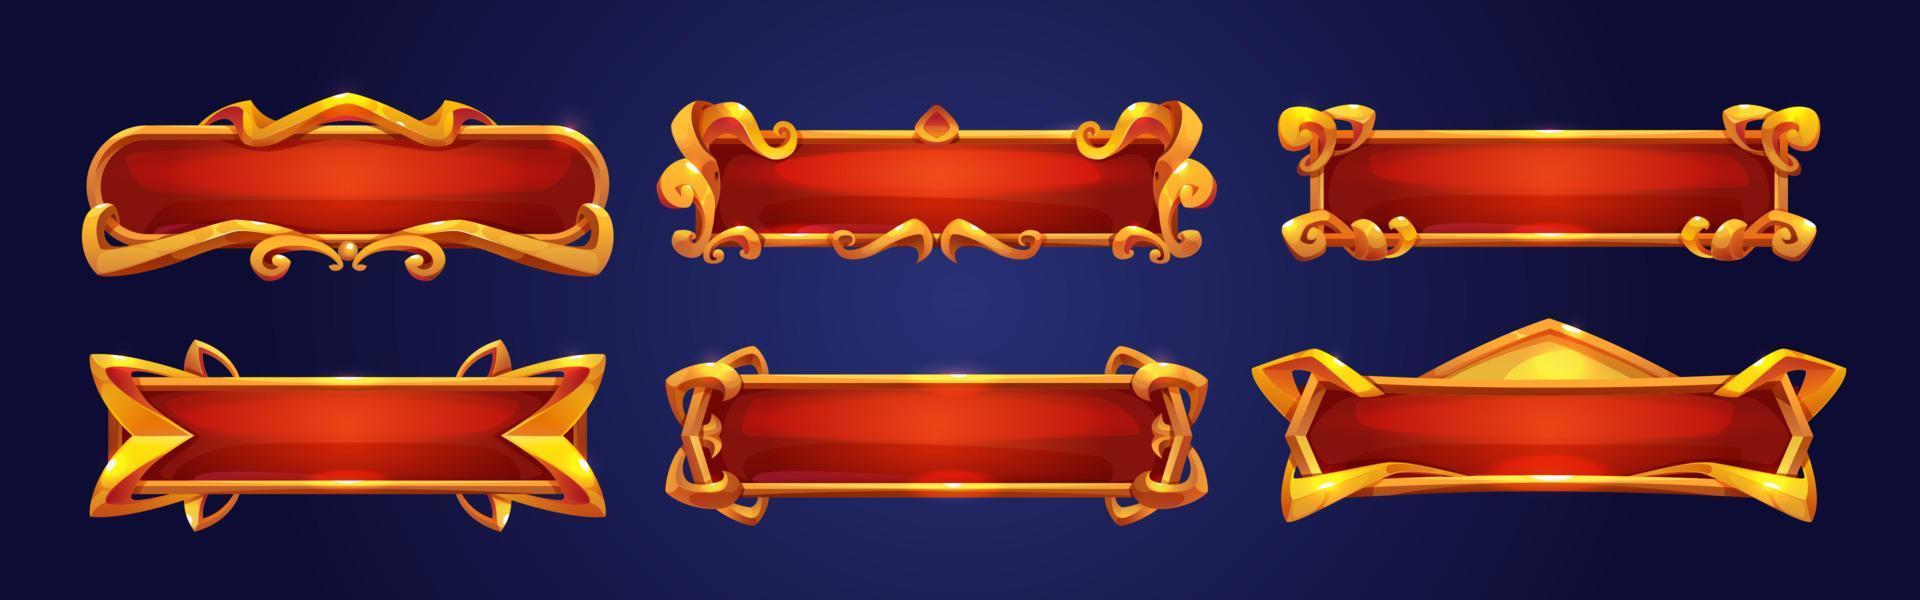 Medieval red buttons, ui game menu elements vector